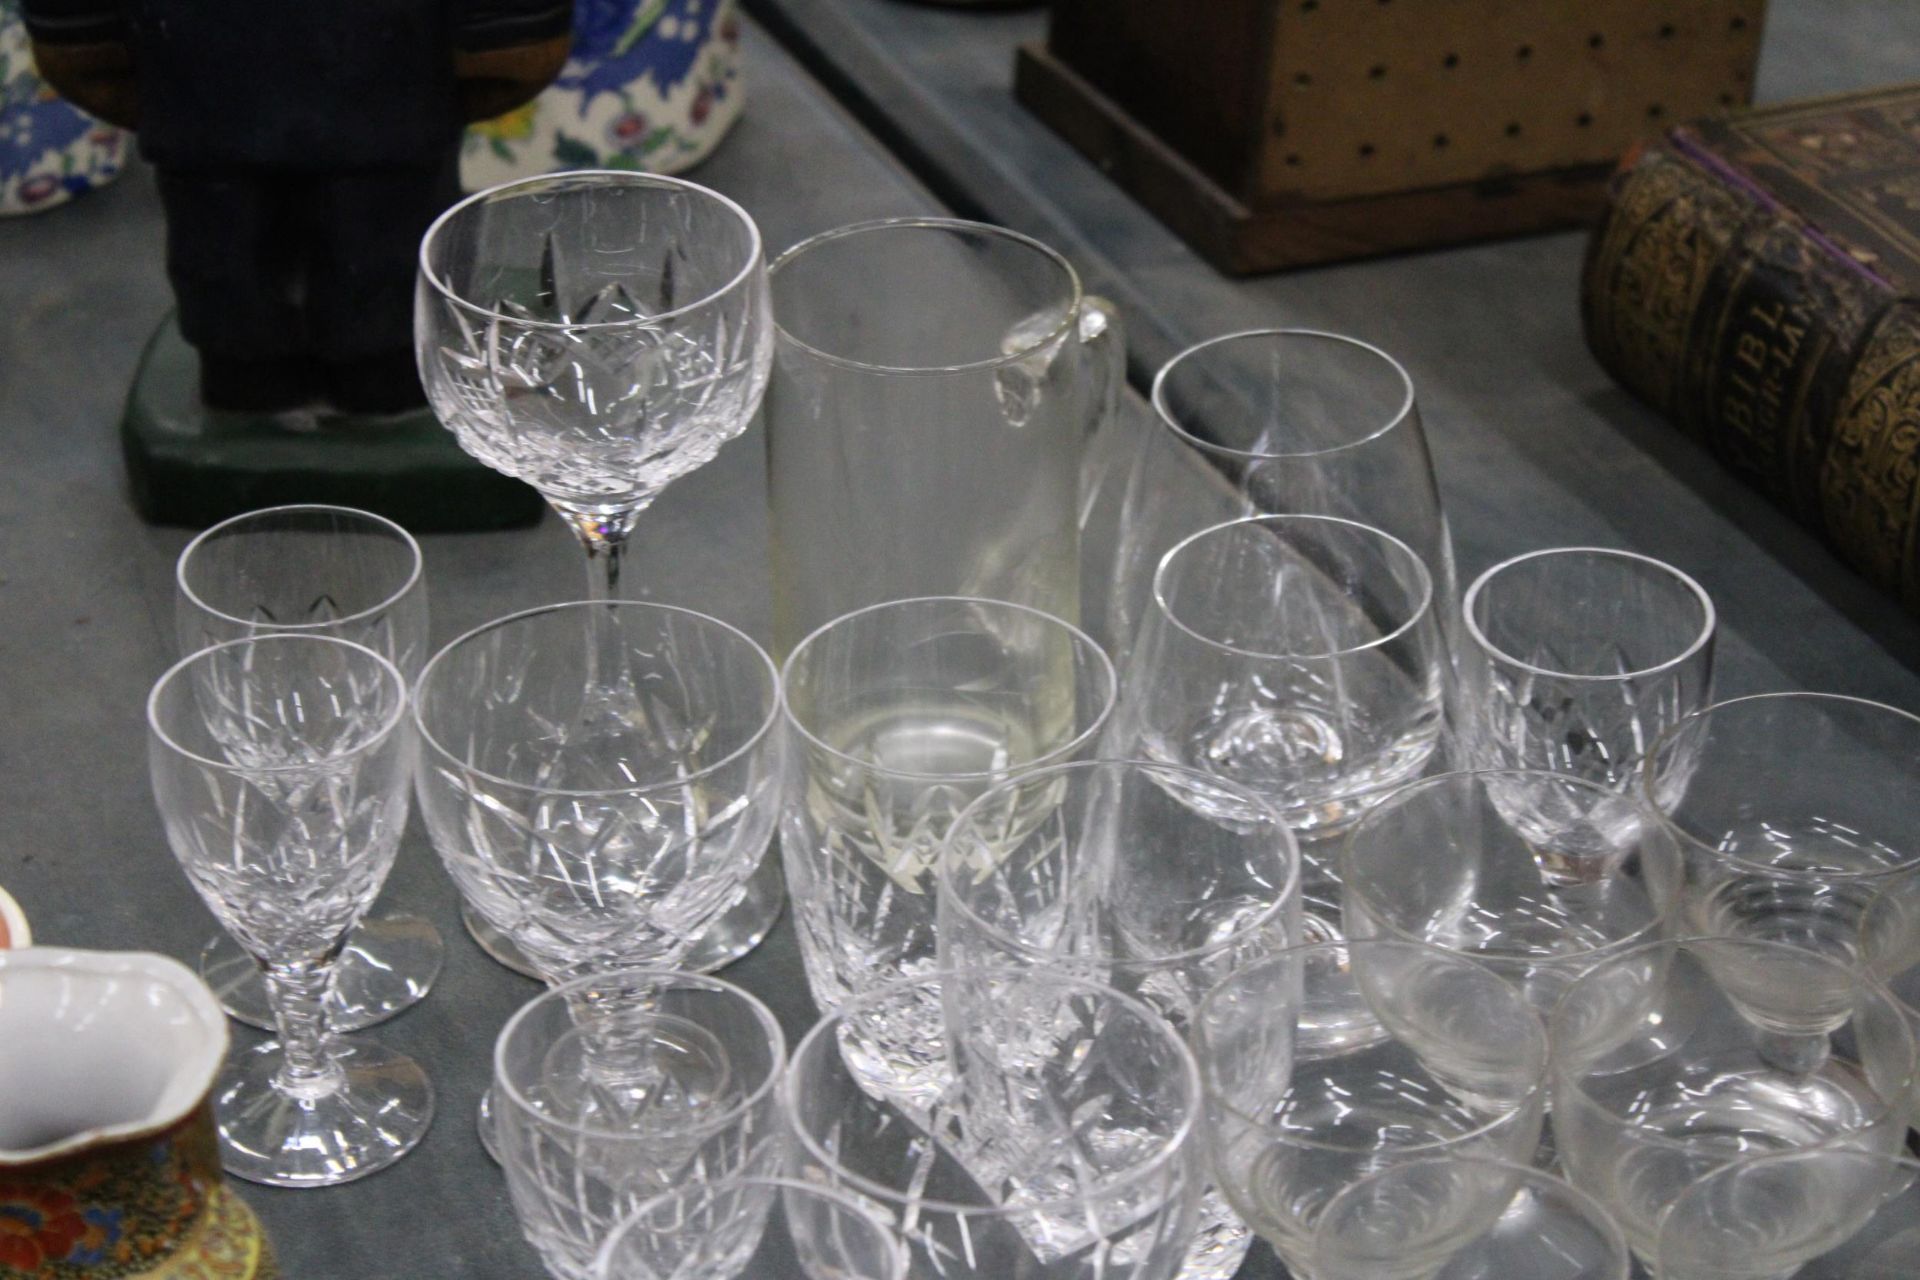 A LARGE QUANTITY OF GLASSES TO INCLUDE SHERRY, LIQUER, TUMBLERS, ETC - Image 4 of 5